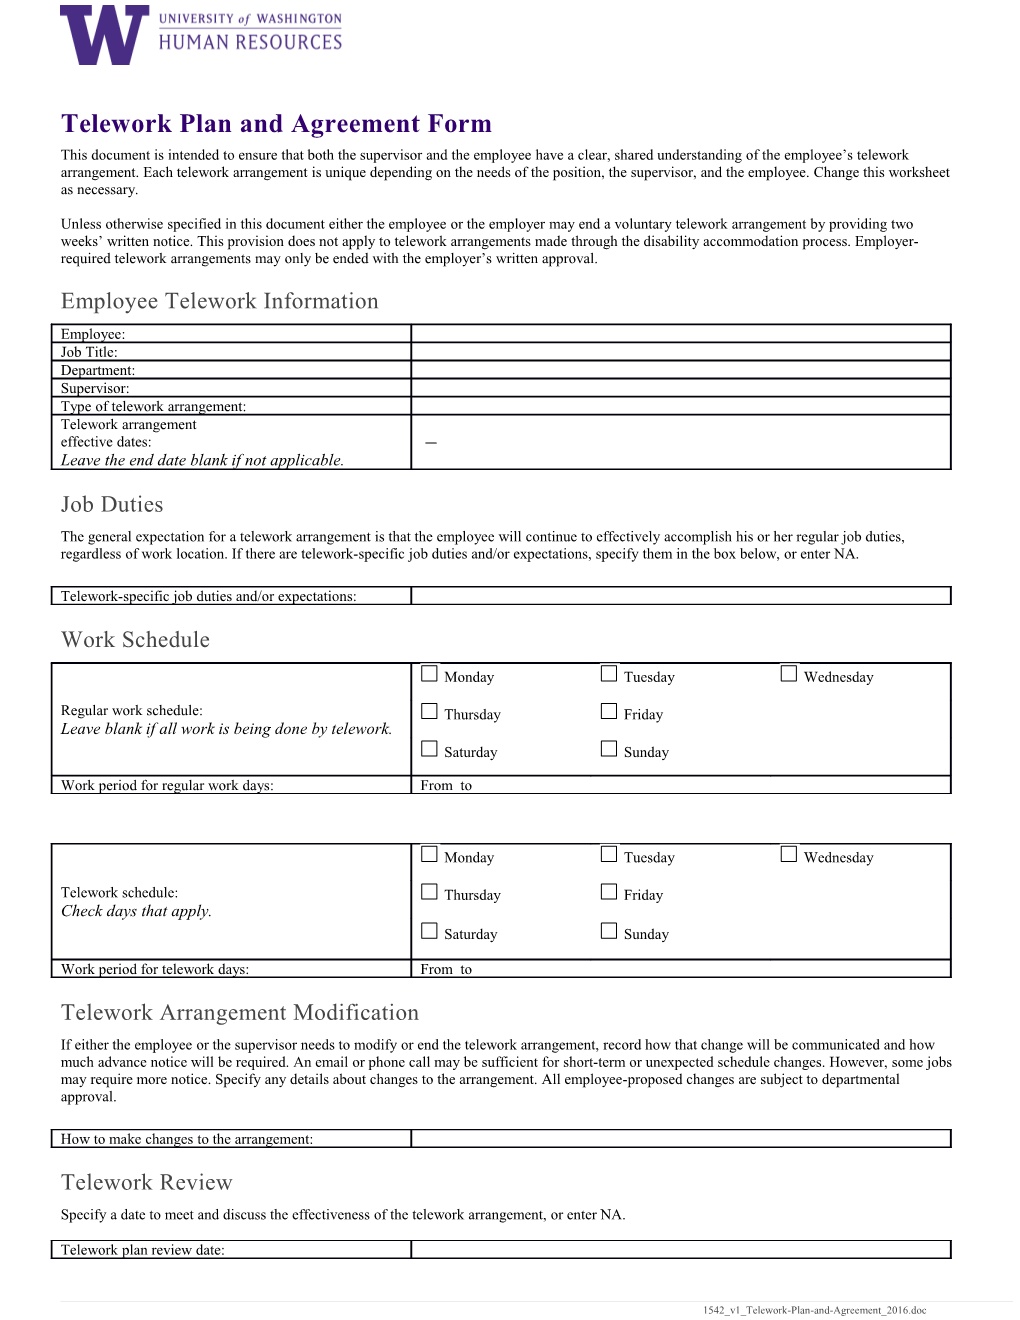 Telework Plan and Agreement Form